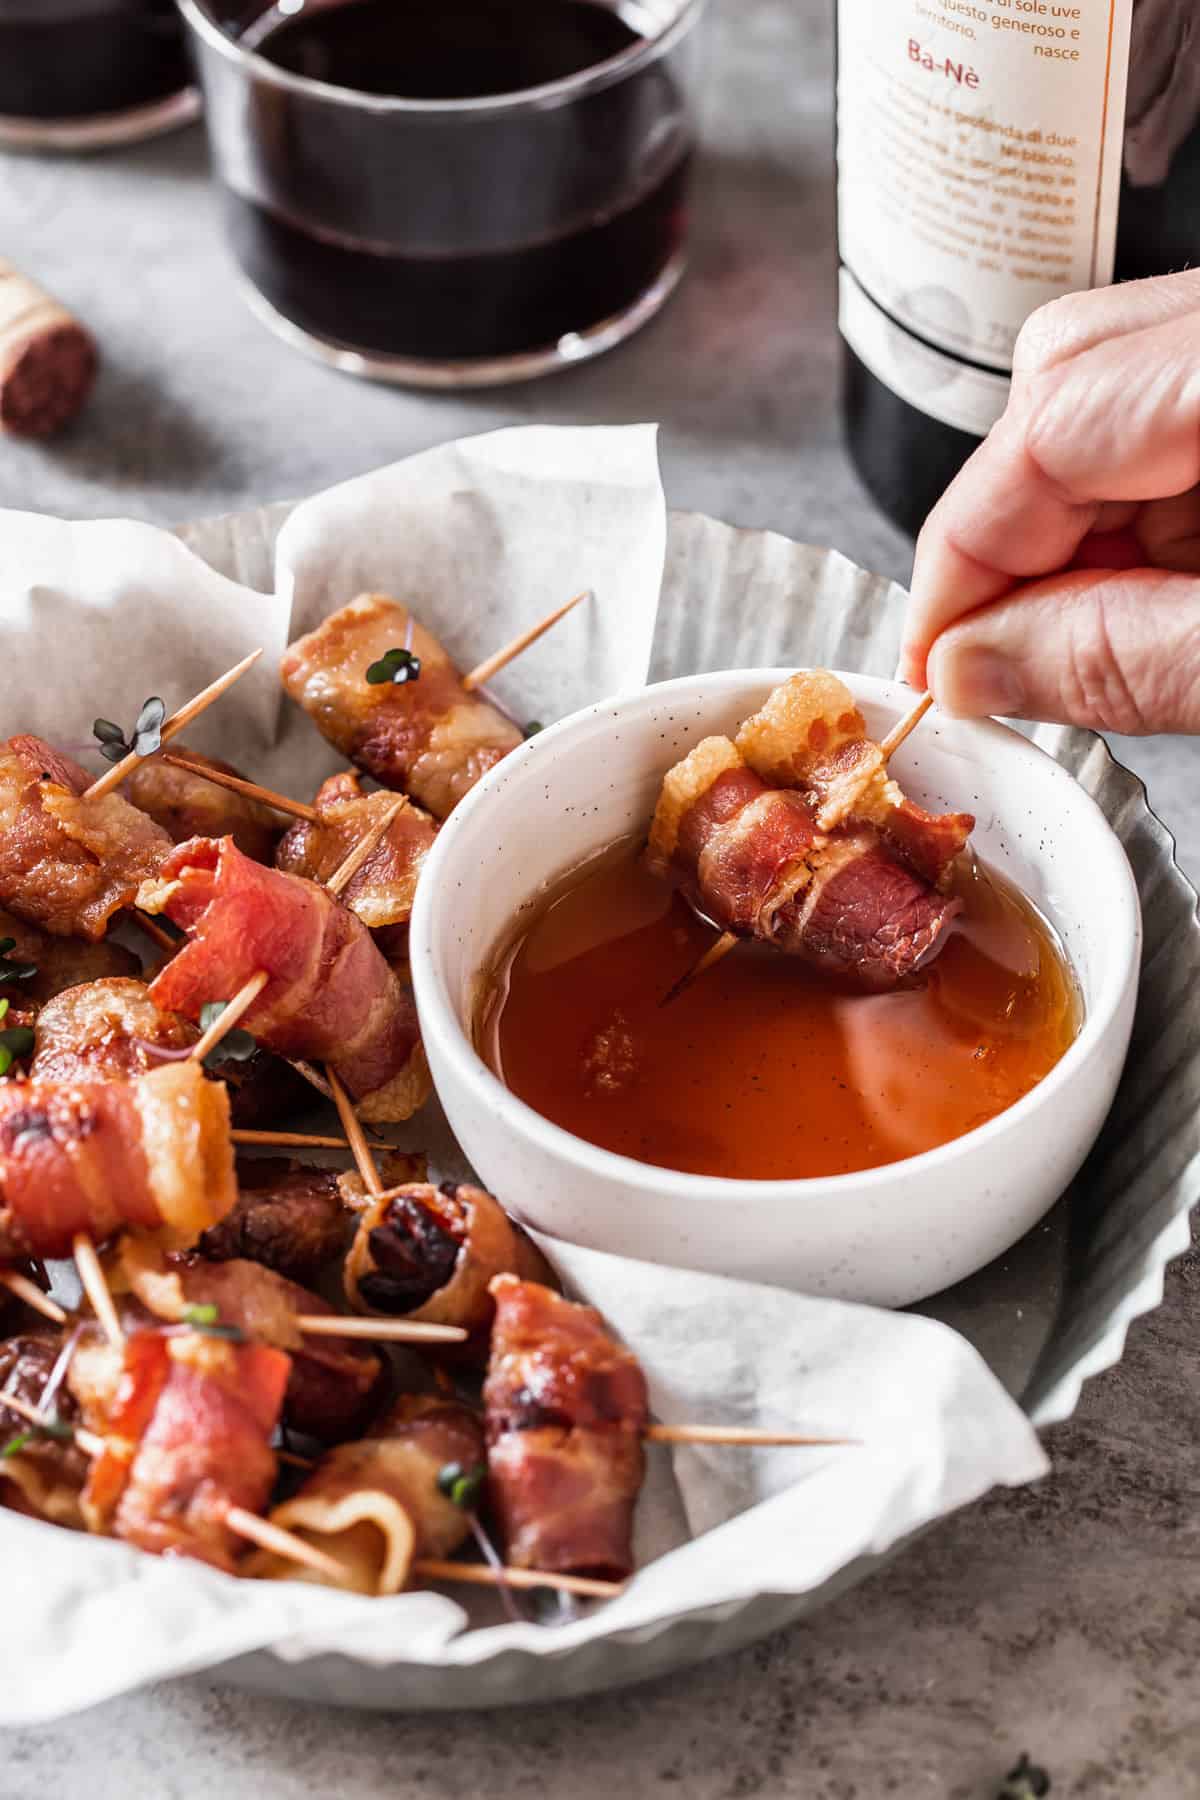 round dish holding bacon wrapped appetizers with hand dipping one into dipping sauce.